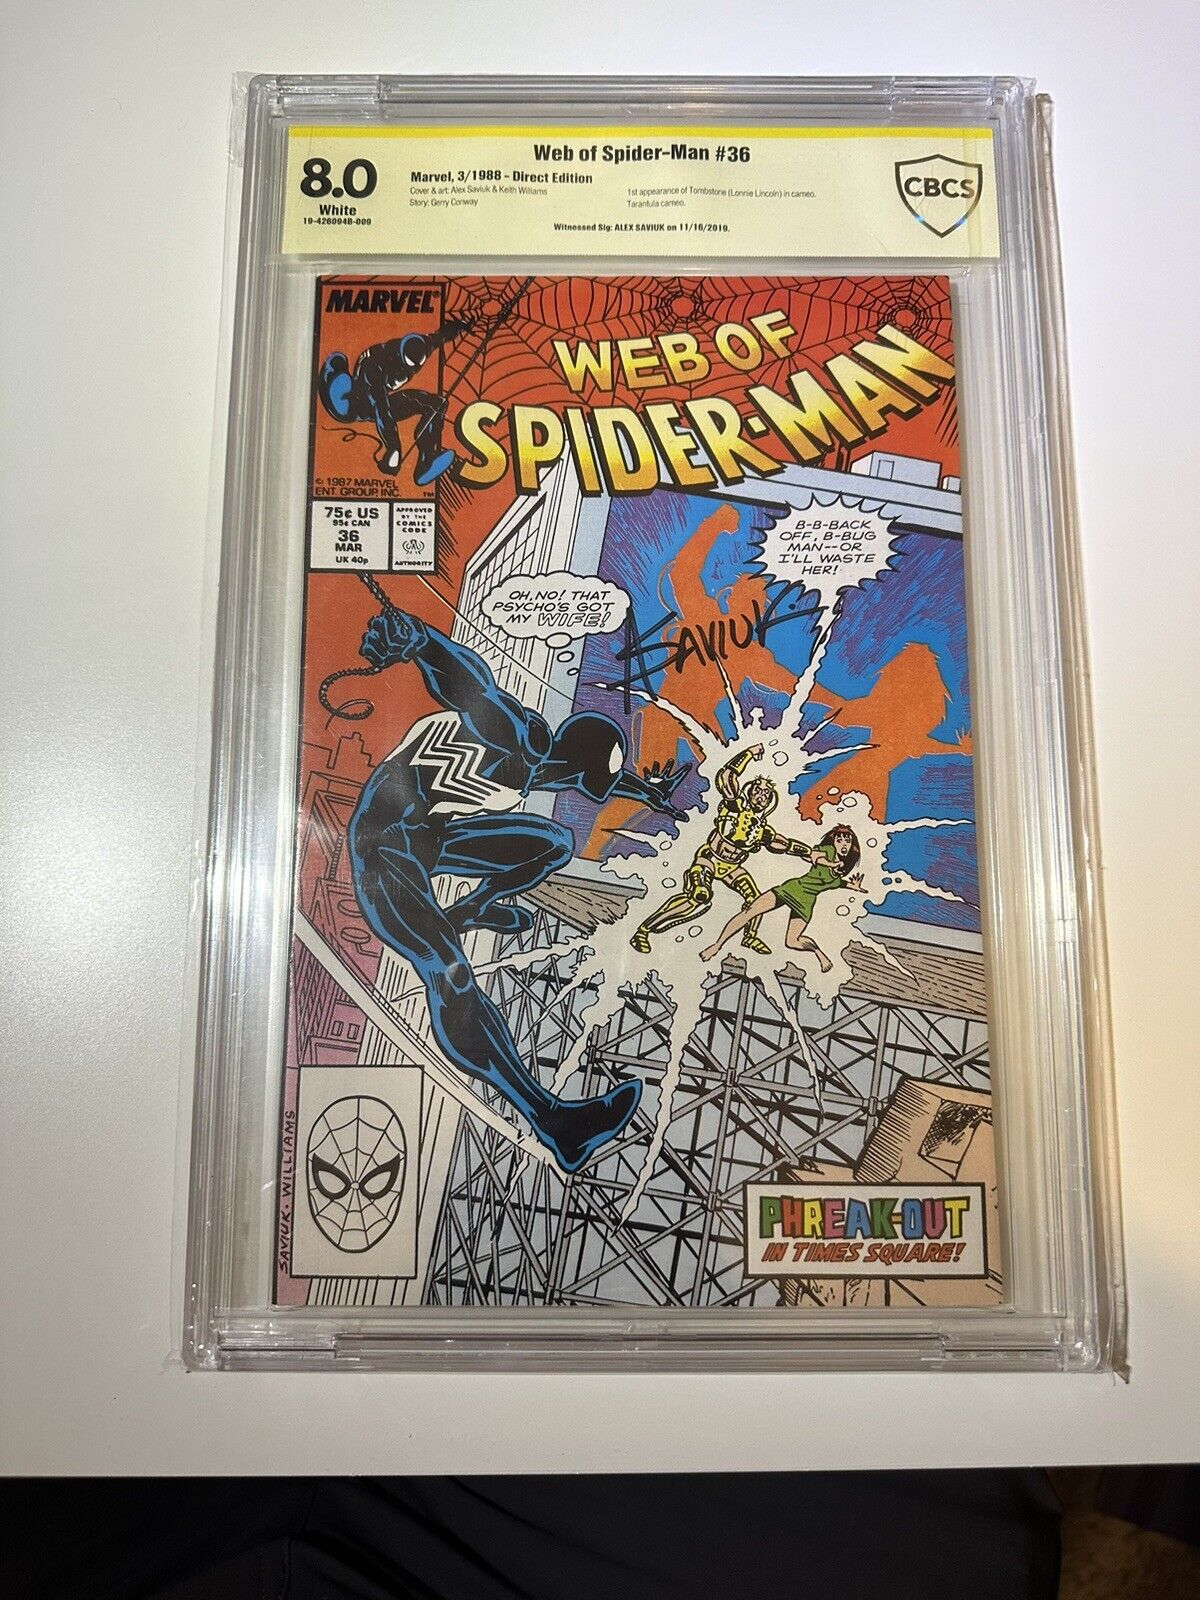 WEB OF SPIDER-MAN 36 (1988) CGC SS 8.0 NEWSSTAND -1ST APP. TOMBSTONE SIGNED